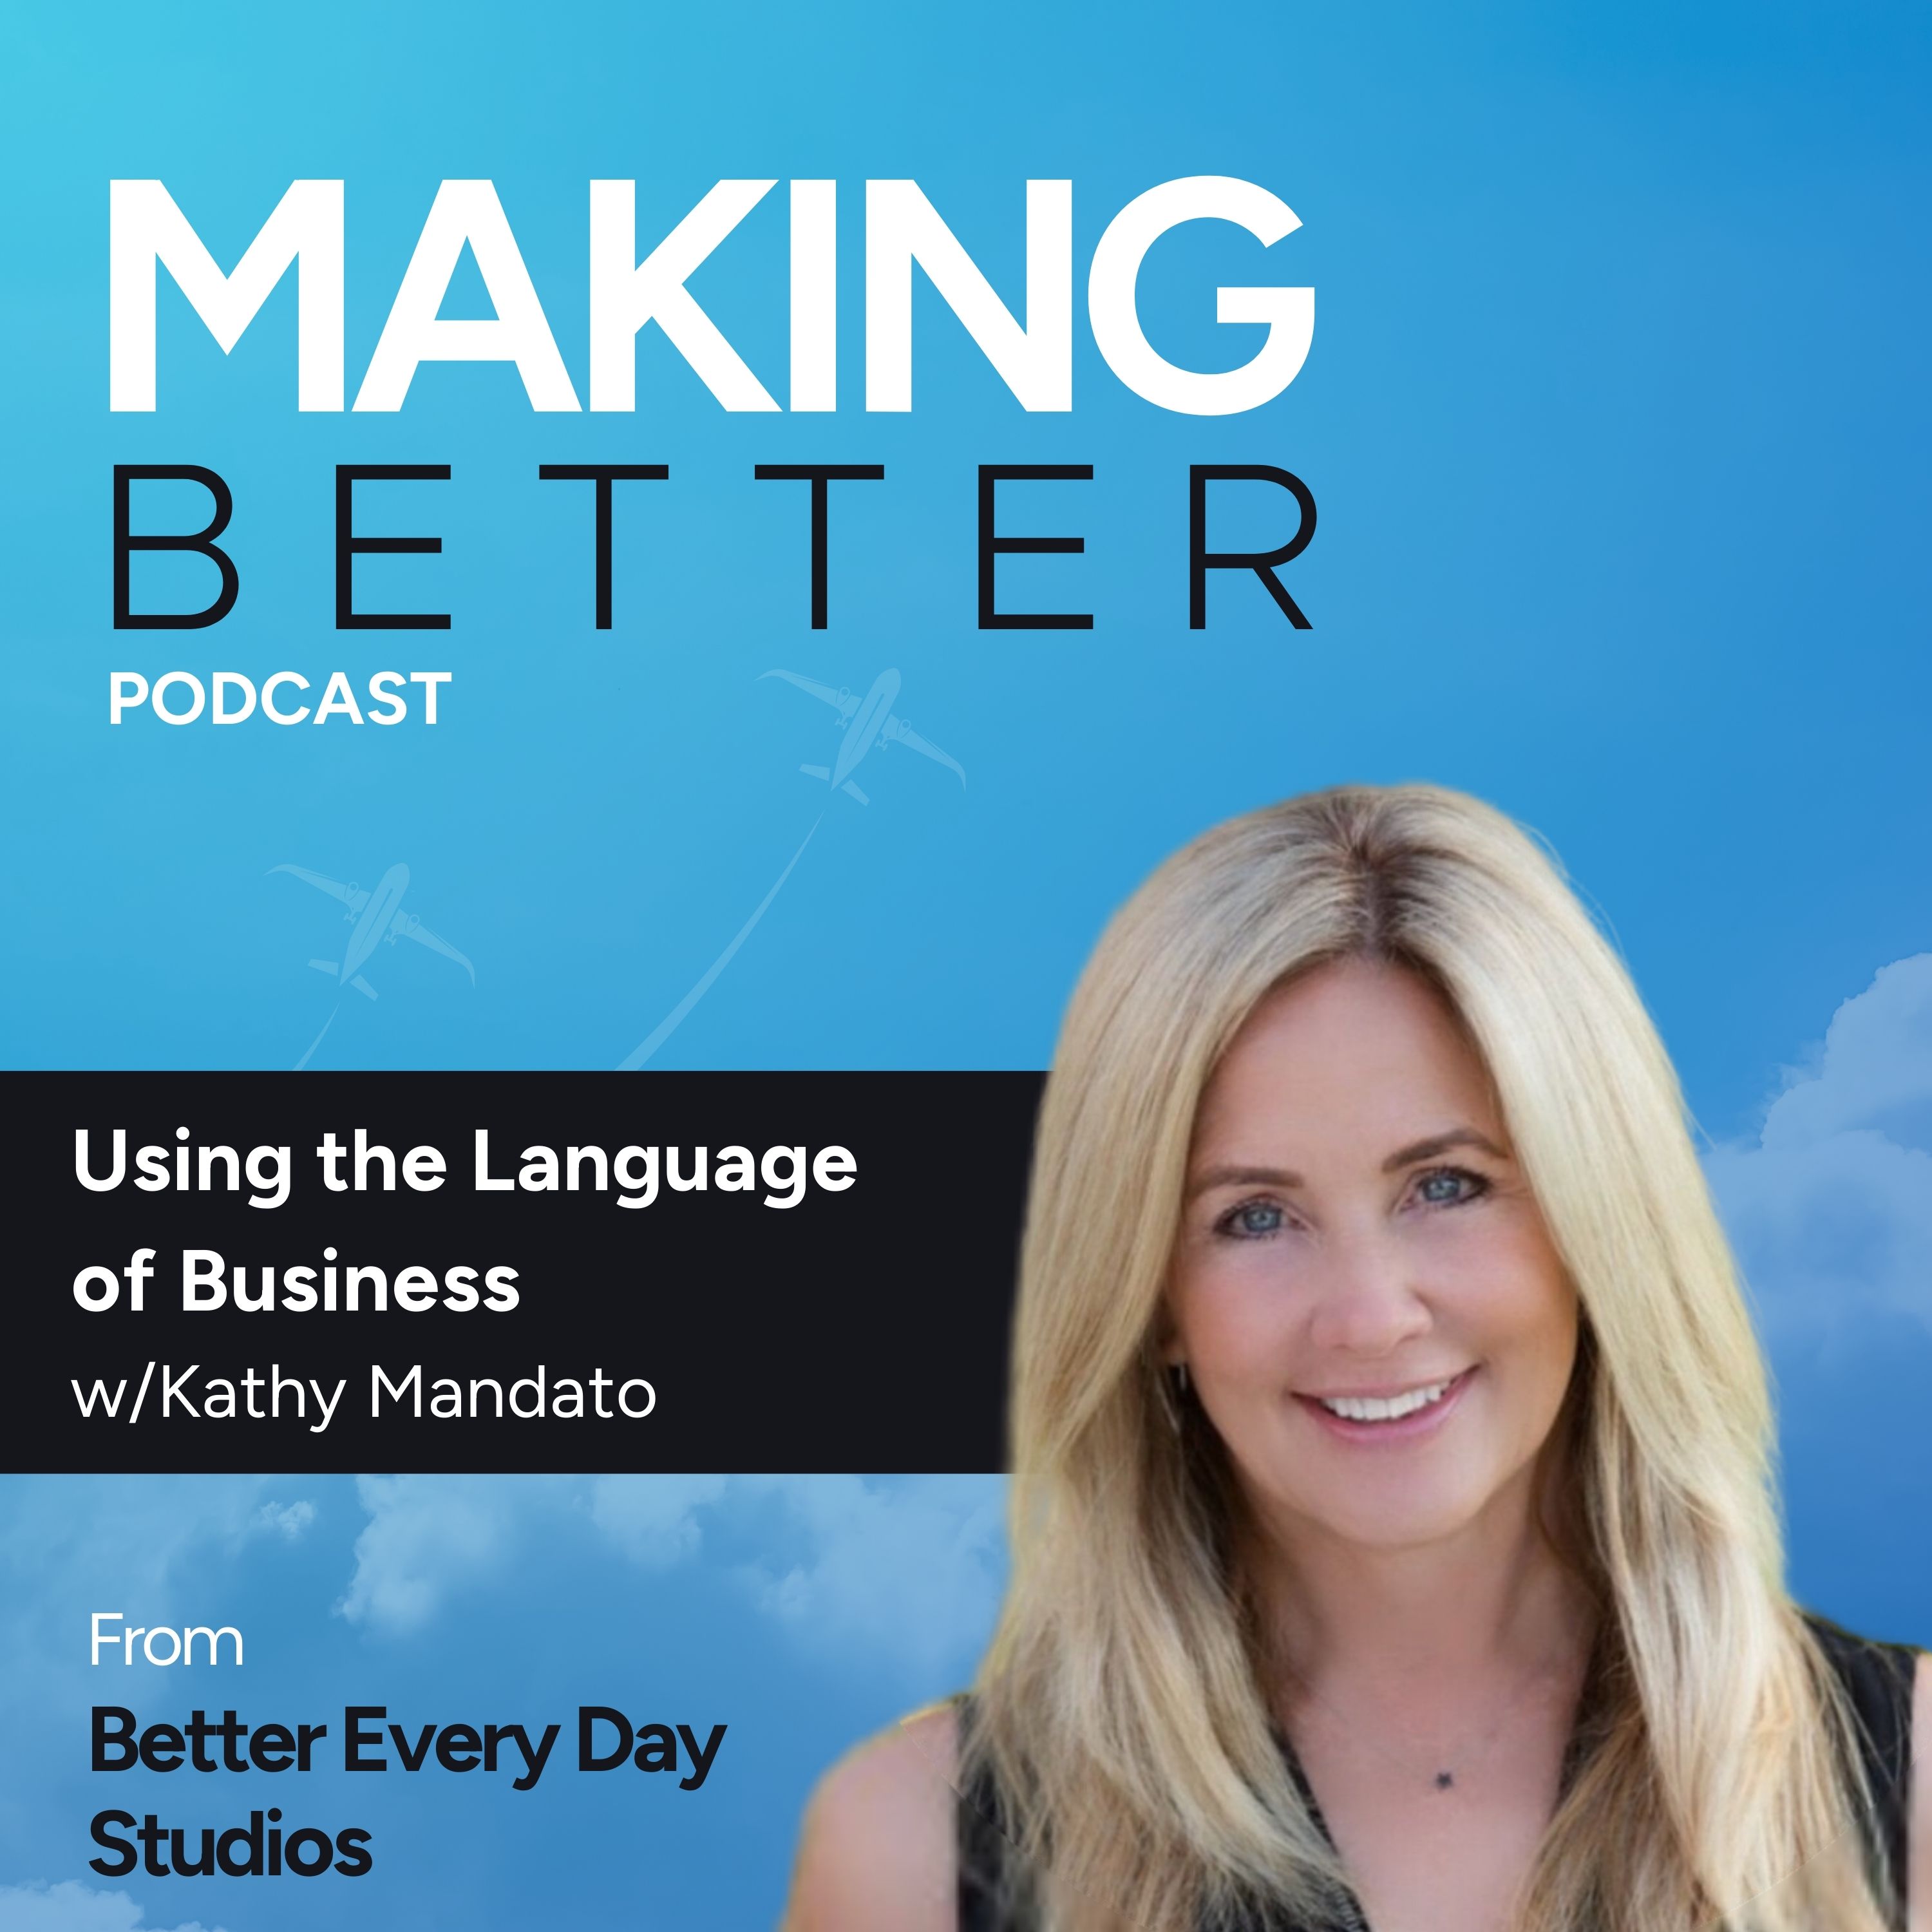 Using the Language of the Business with Kathy Mandato